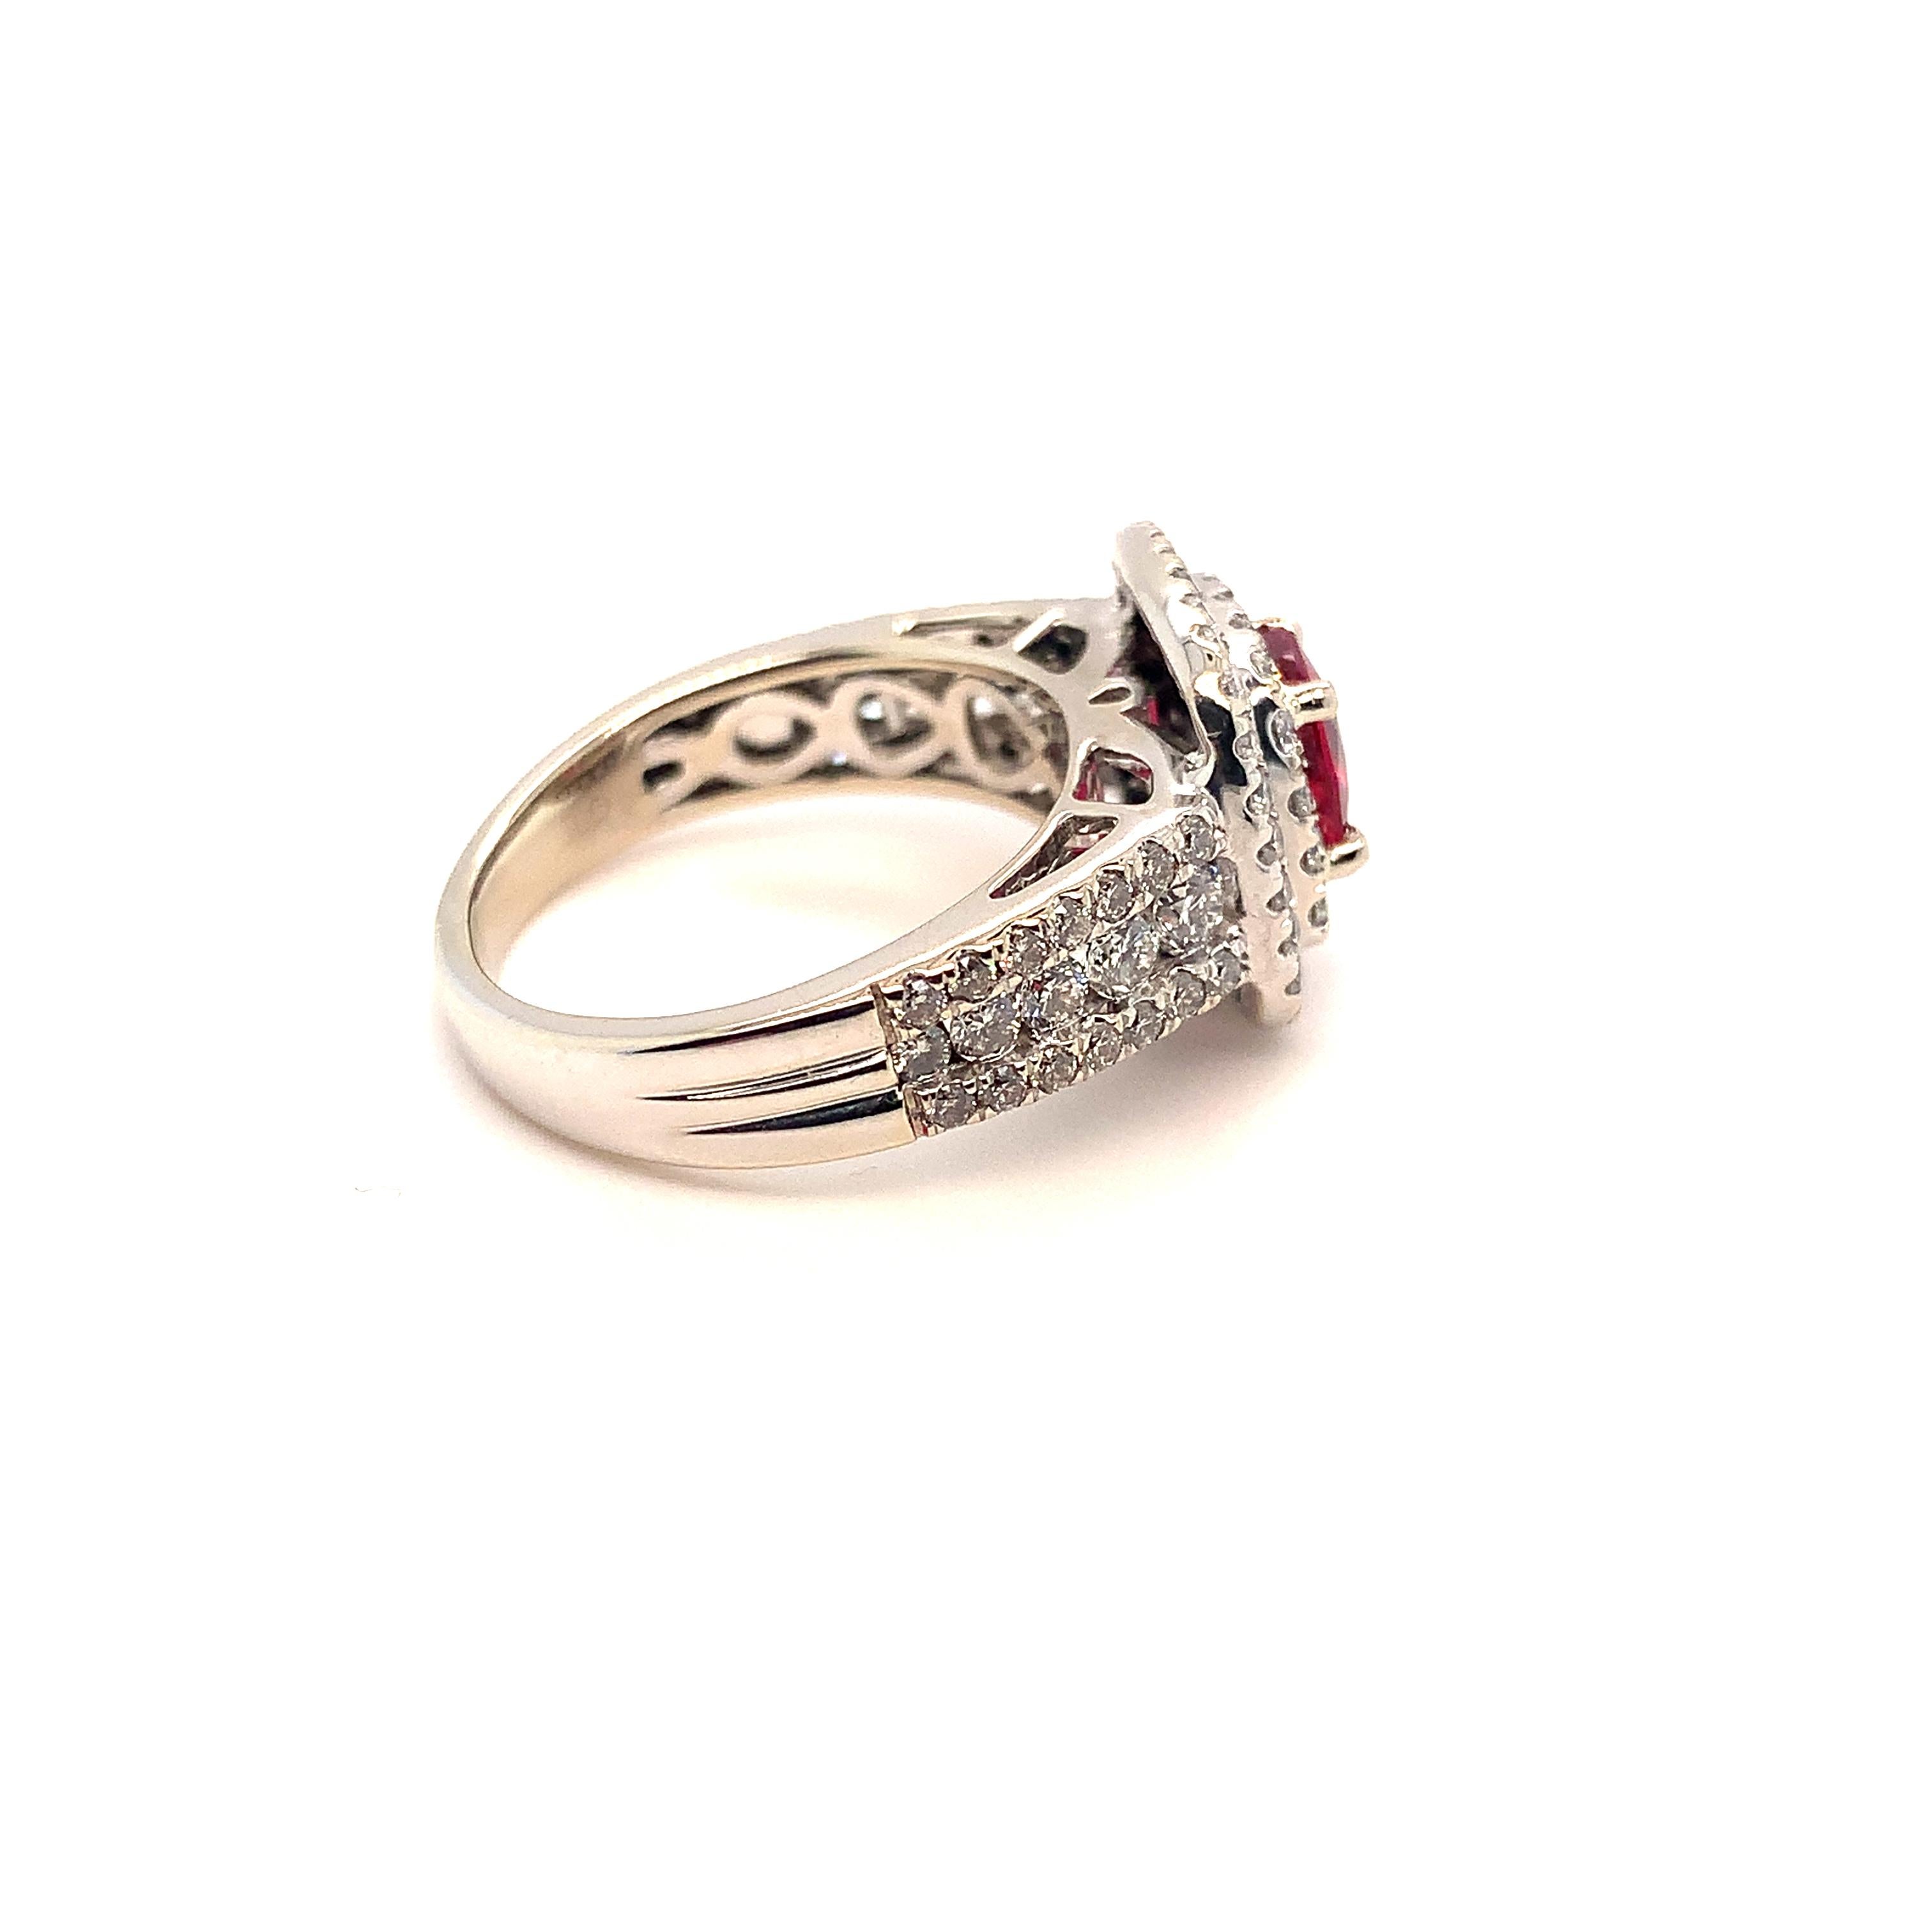 14K white gold diamond ring featuring a jedi red spinel. The red spinel weighs .91 carats and comes with a GFCO report stating Burmese and no heat. The spinel is cushion cut and measures 6.6mm x 5.8mm x 2.7mm. There is a double halo of small white